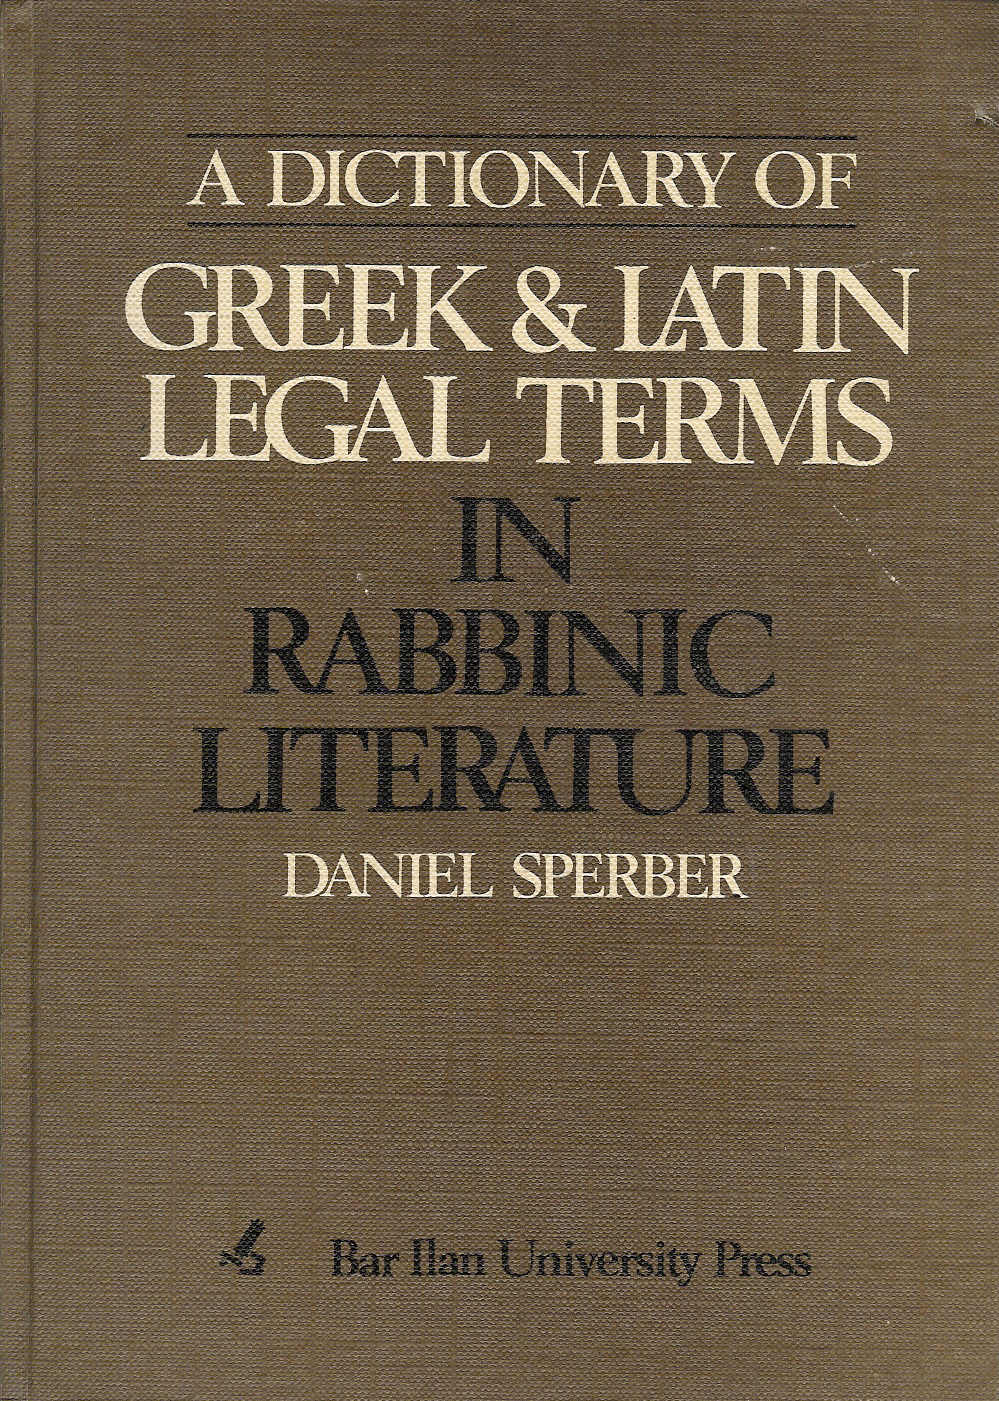 A Dictionary of Greek and Latin Legal Terms in Rabbinic Literature